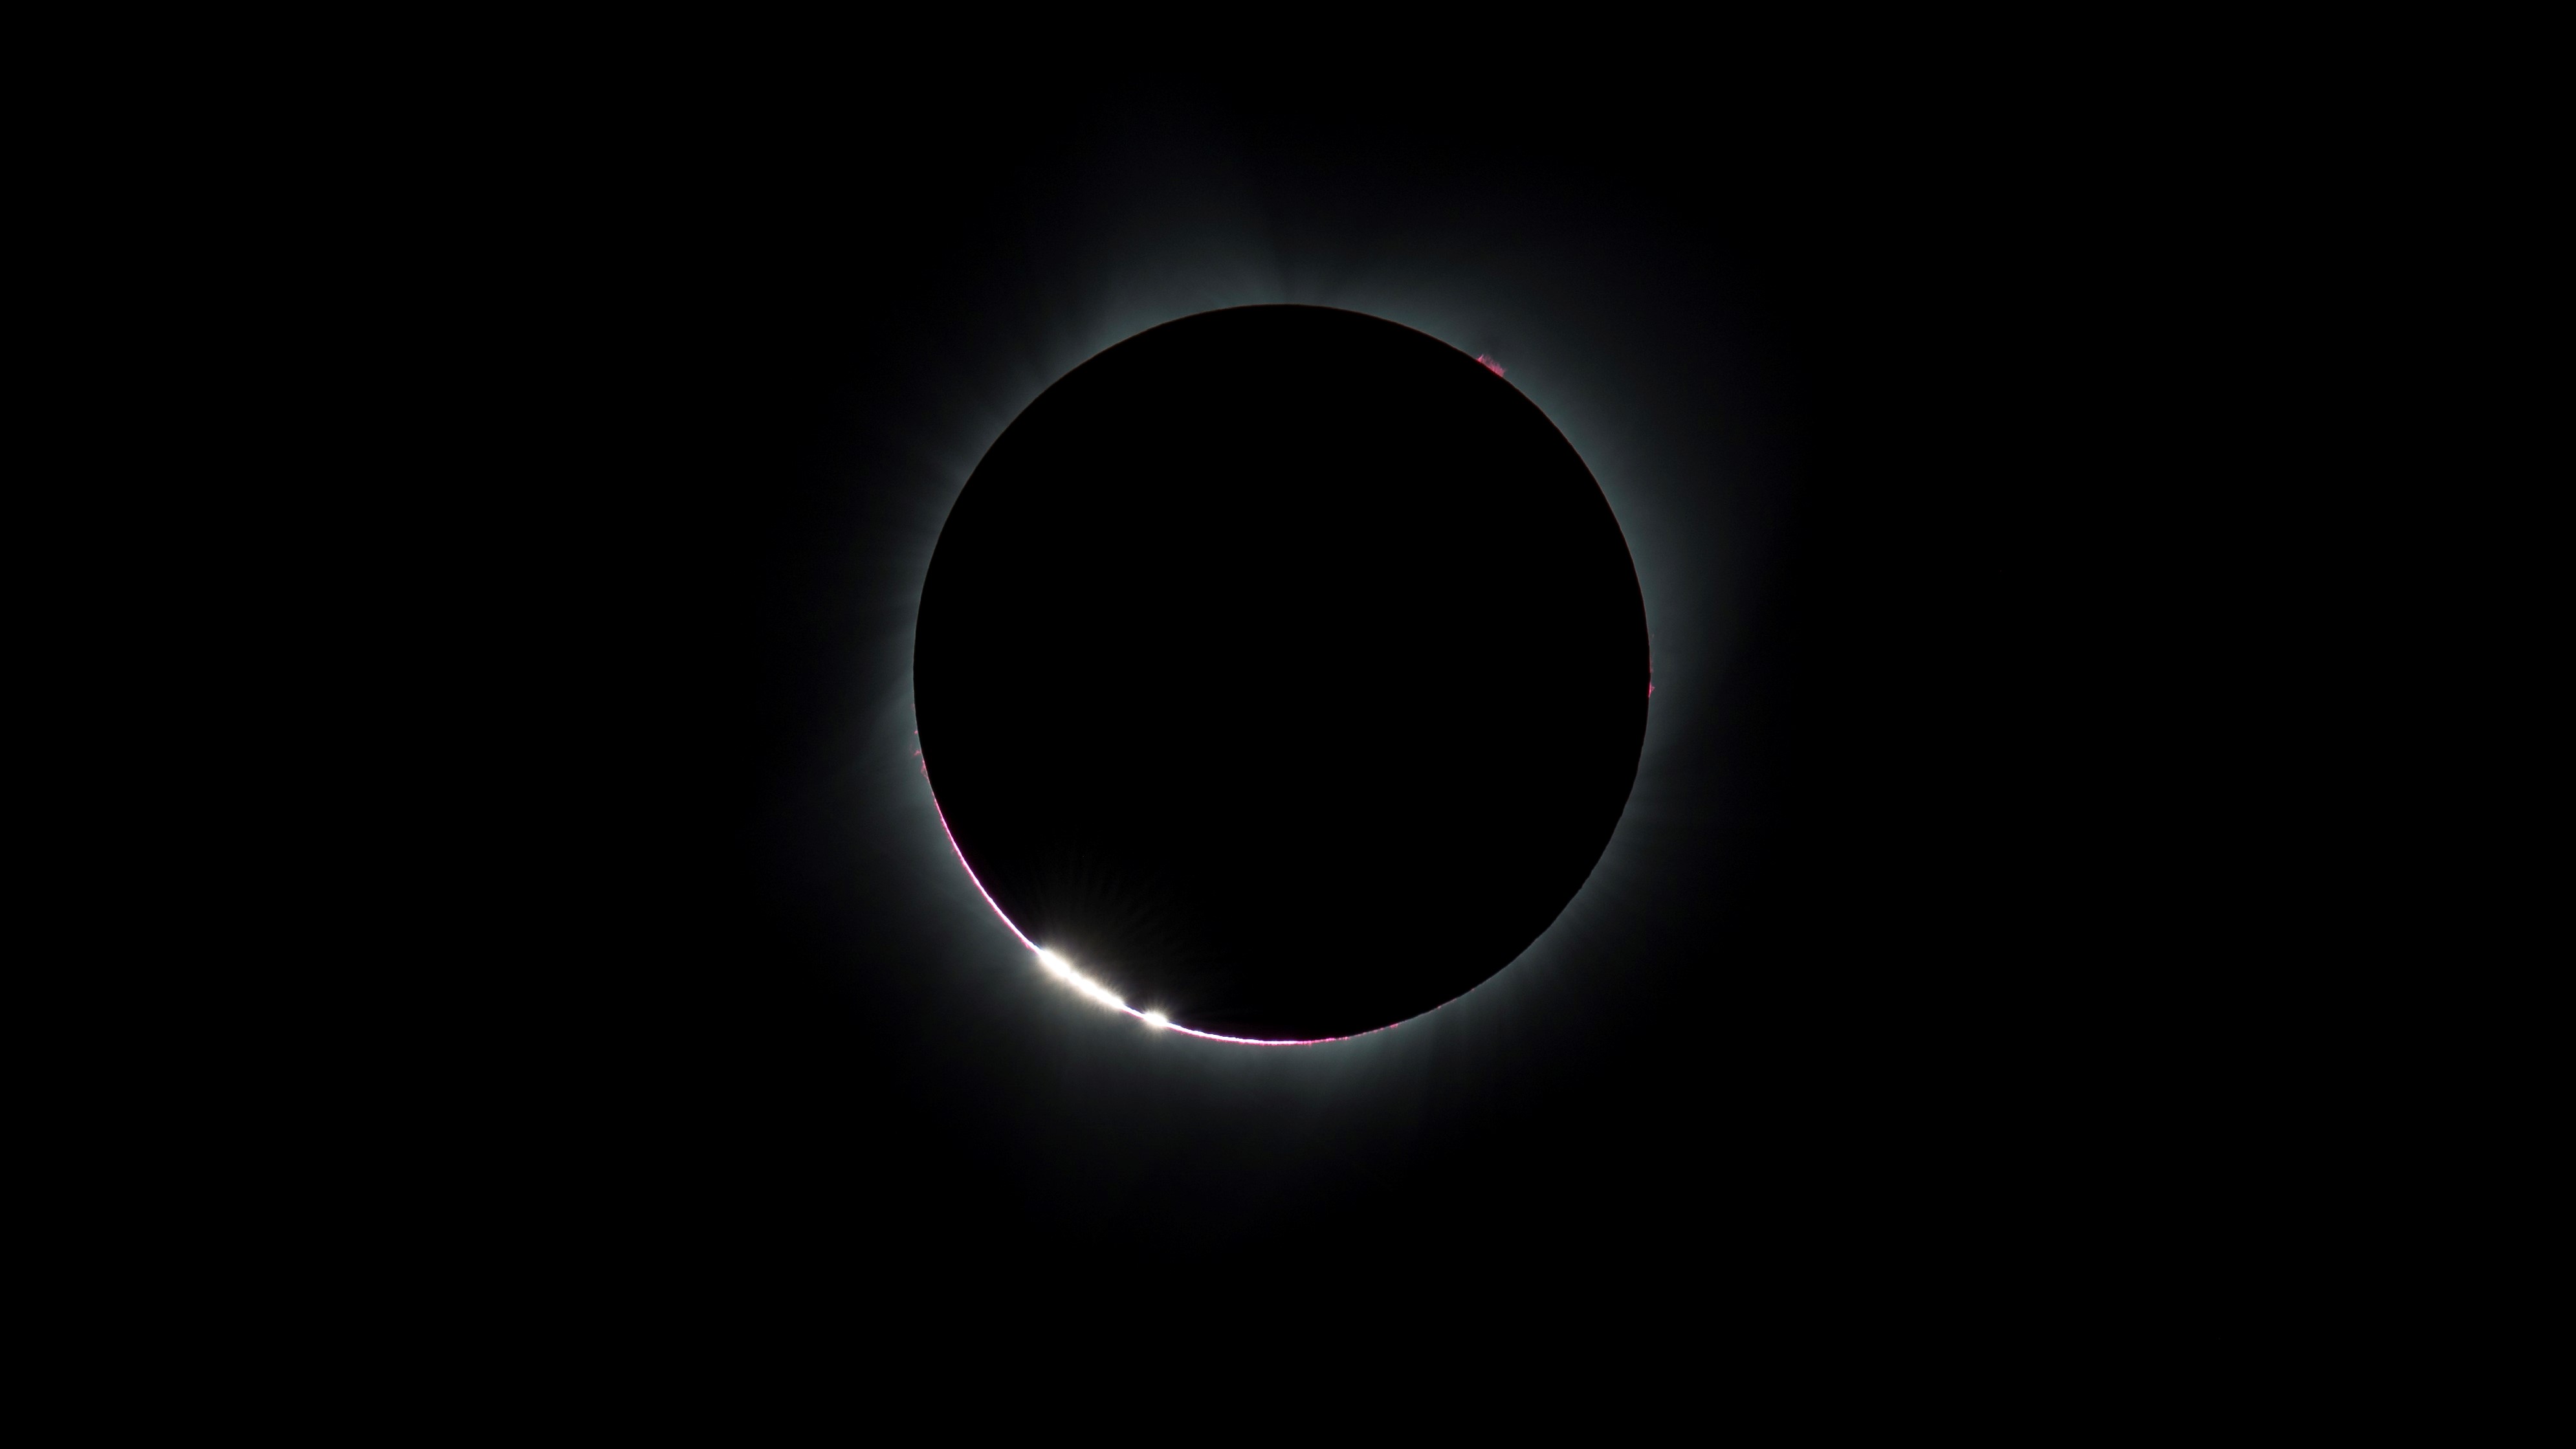 Bright pearls of light are produced around the very edge of an eclipse just before totality.